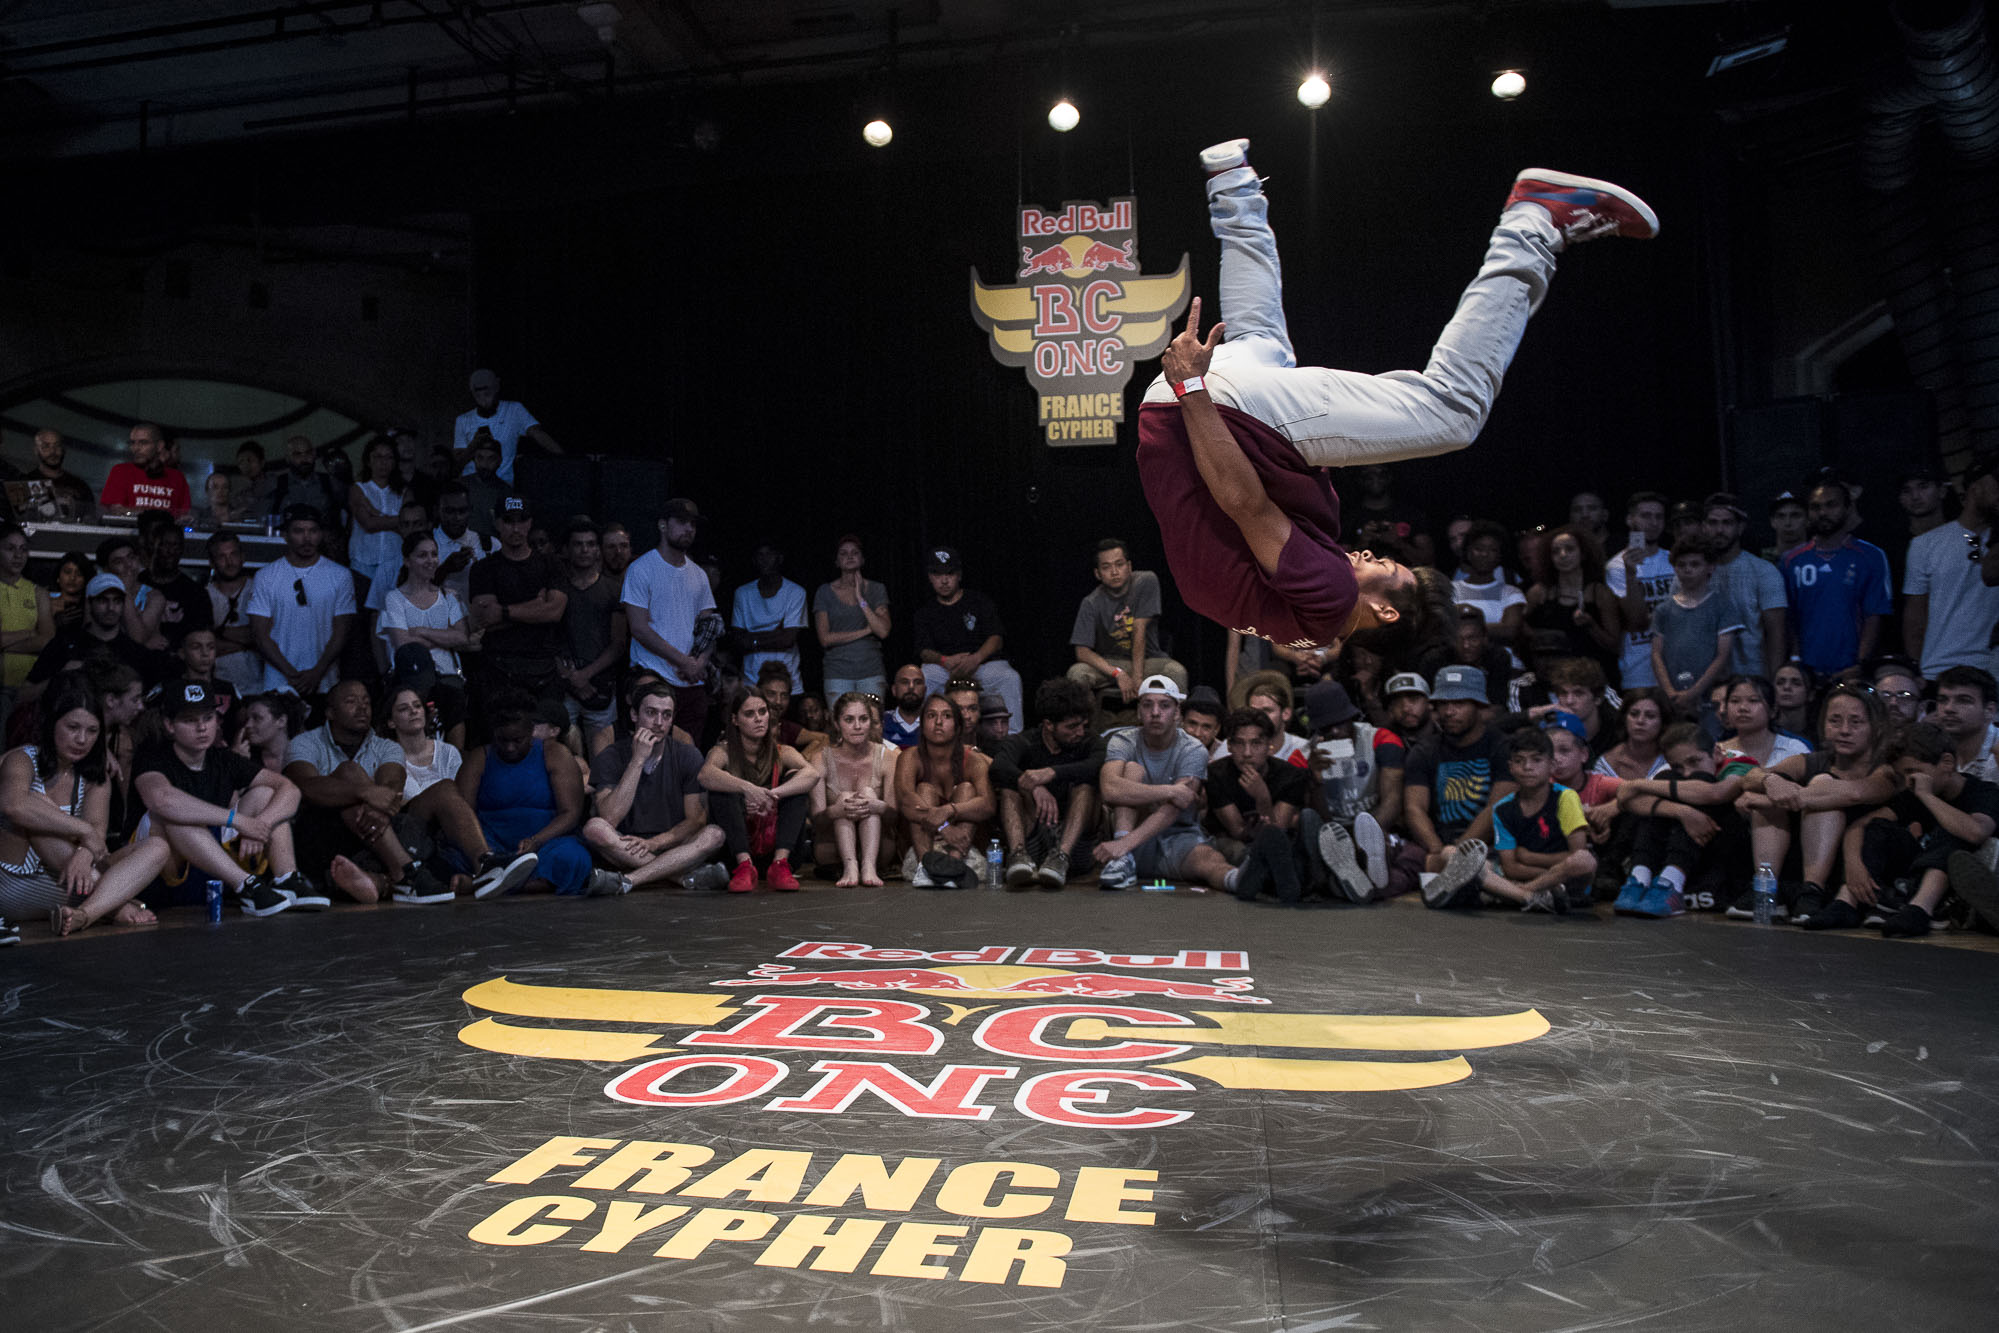 Will (winner) competes at the WIP Villette during the Red Bull BC One France Cypher Final in Paris, France on July 10th 2016.